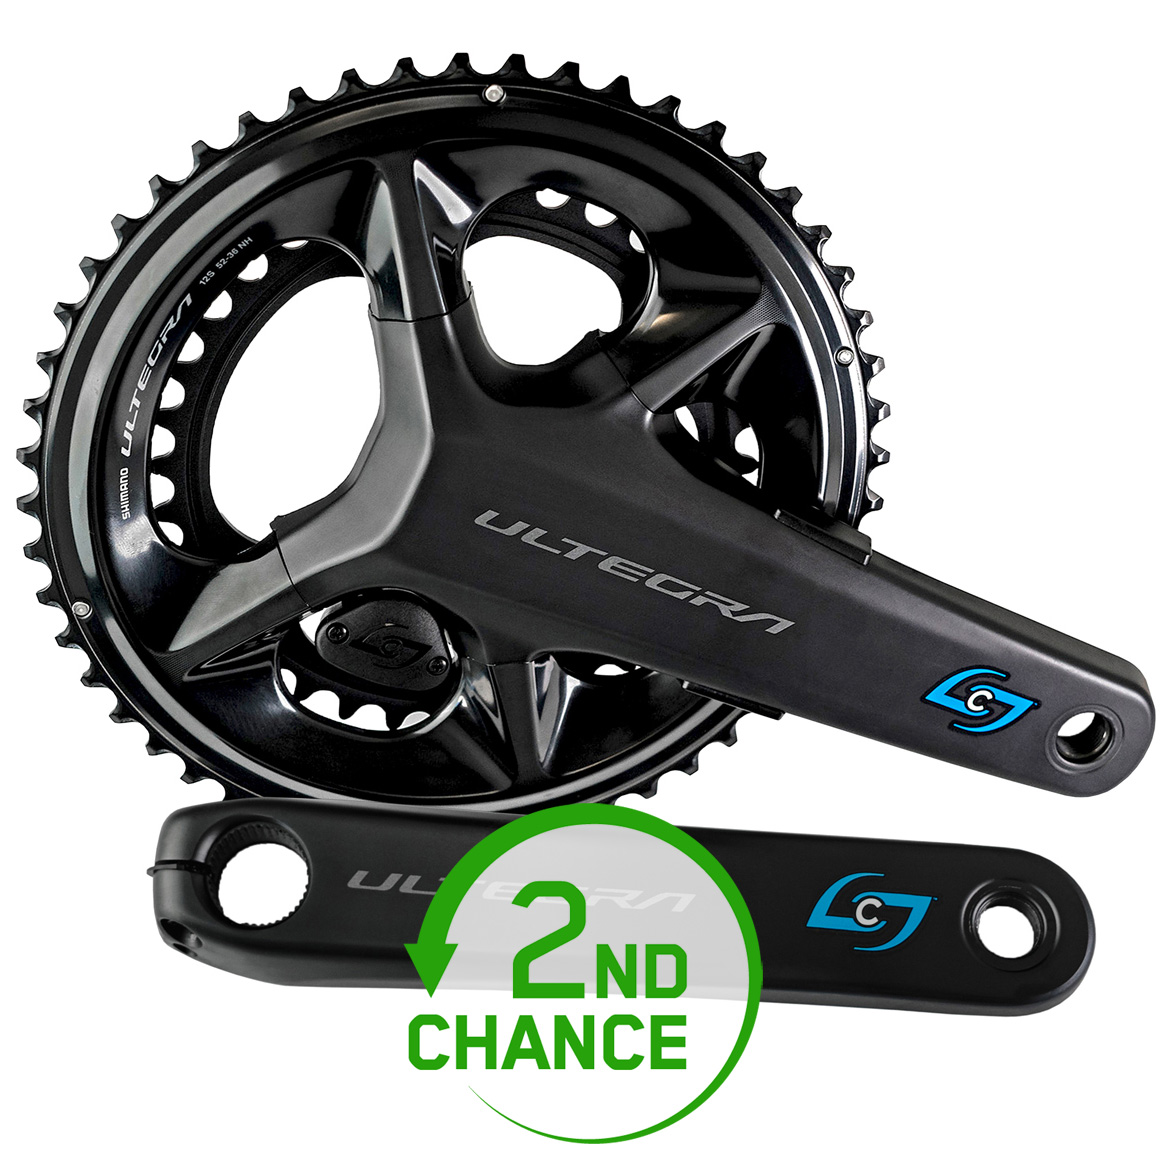 Picture of Stages Cycling Power LR Powermeter | Crankset by Shimano - Ultegra R8100 | 2x12-speed - black - 2nd Choice